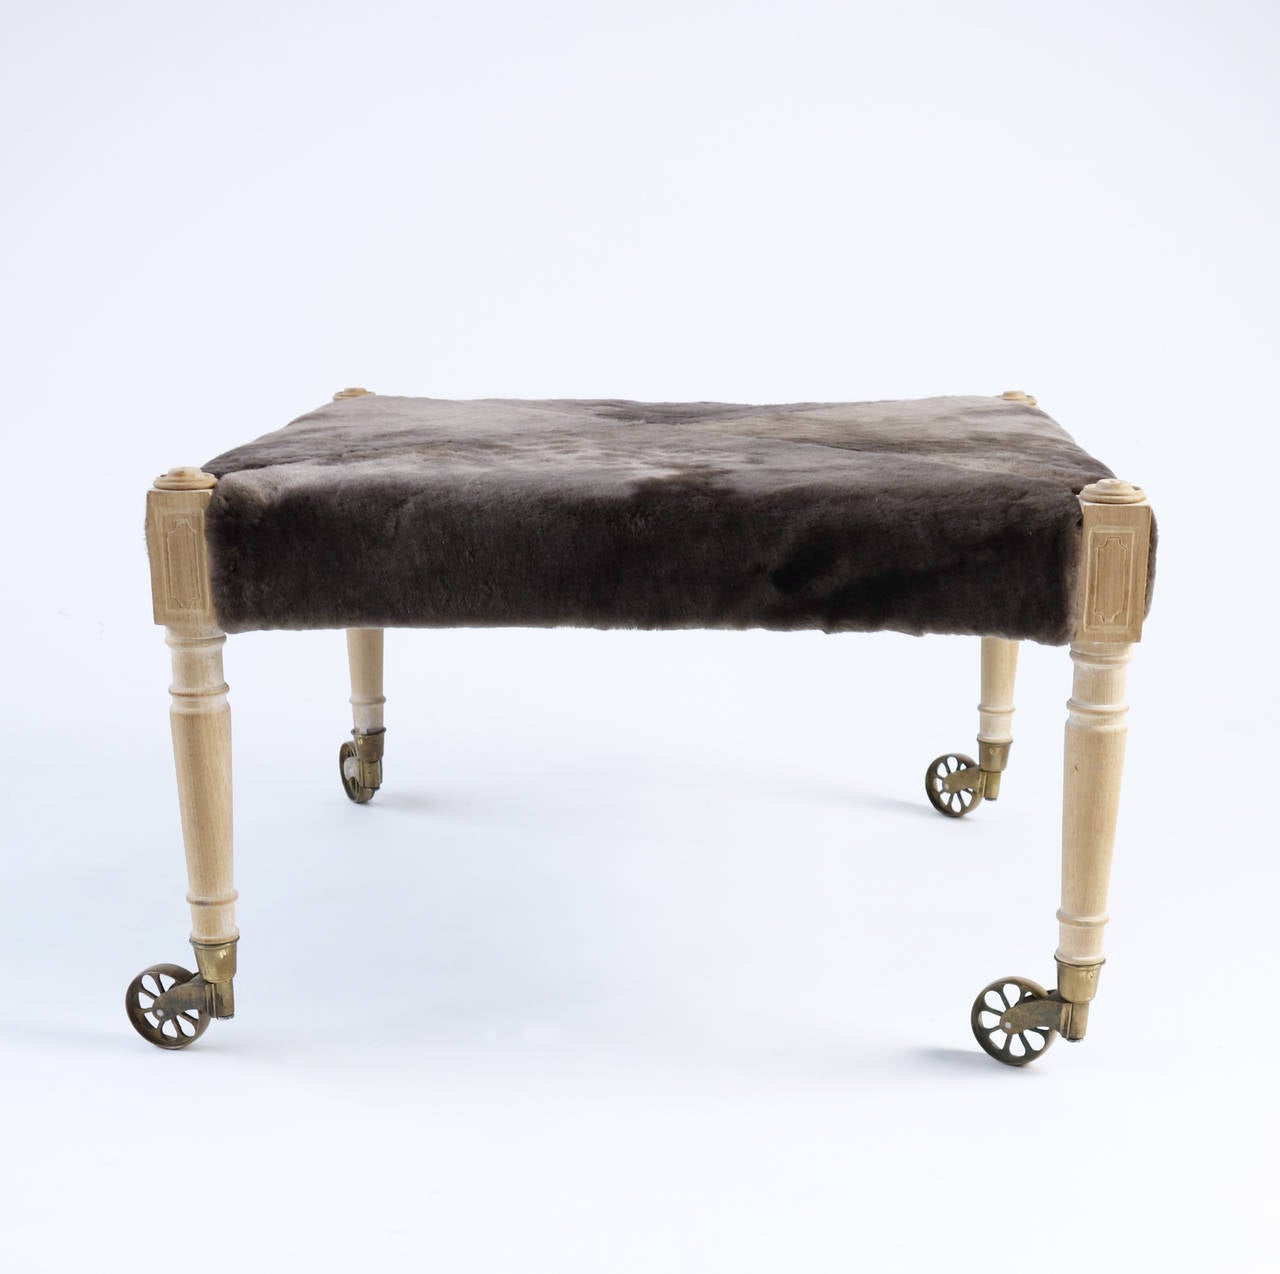 Limed Shearling-Covered Neoclassical Ottoman